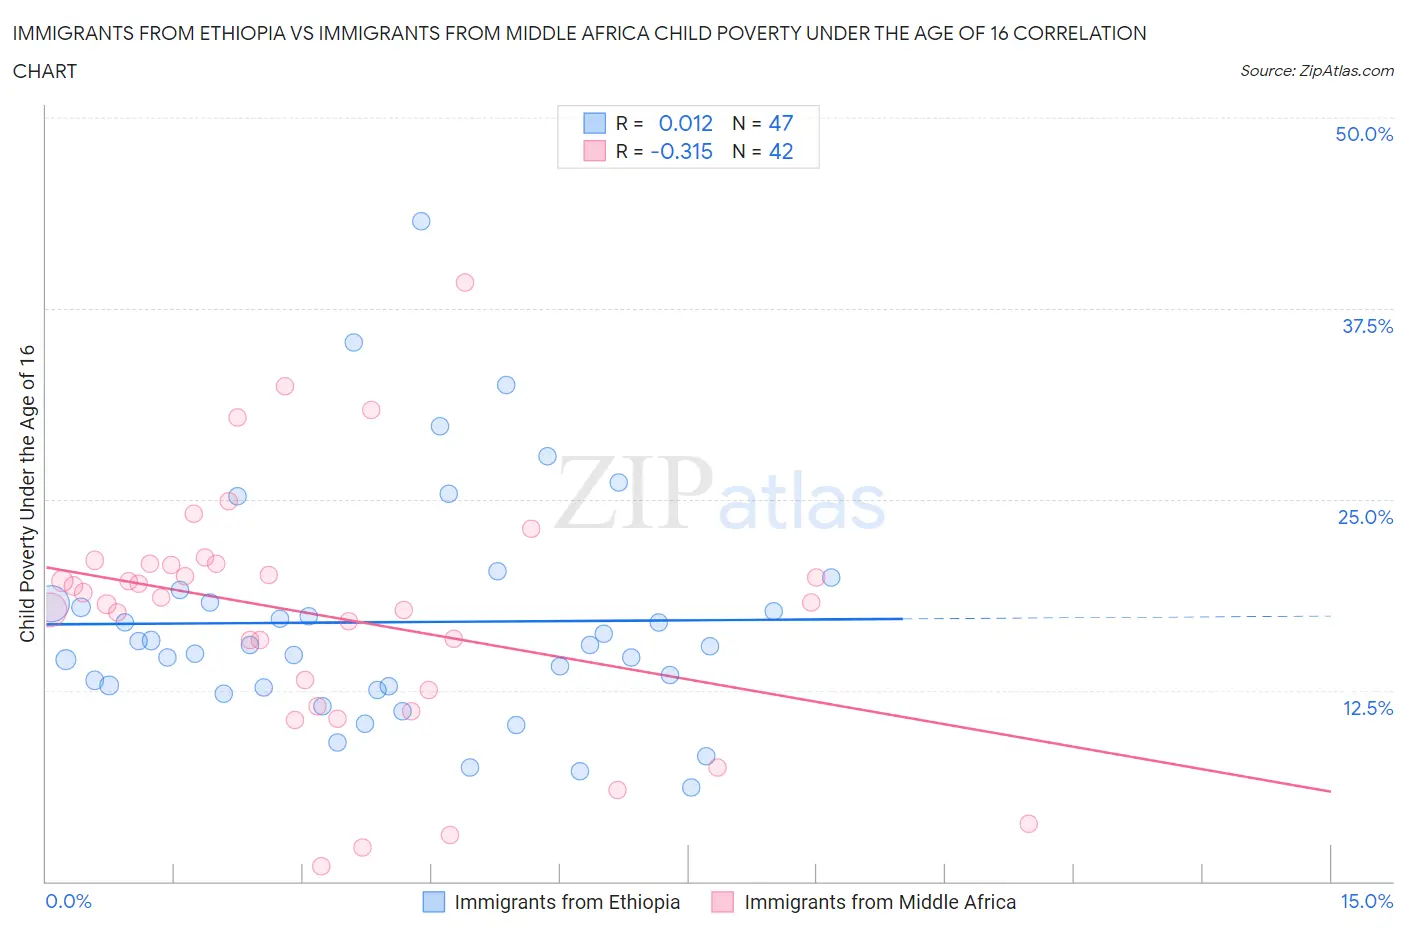 Immigrants from Ethiopia vs Immigrants from Middle Africa Child Poverty Under the Age of 16